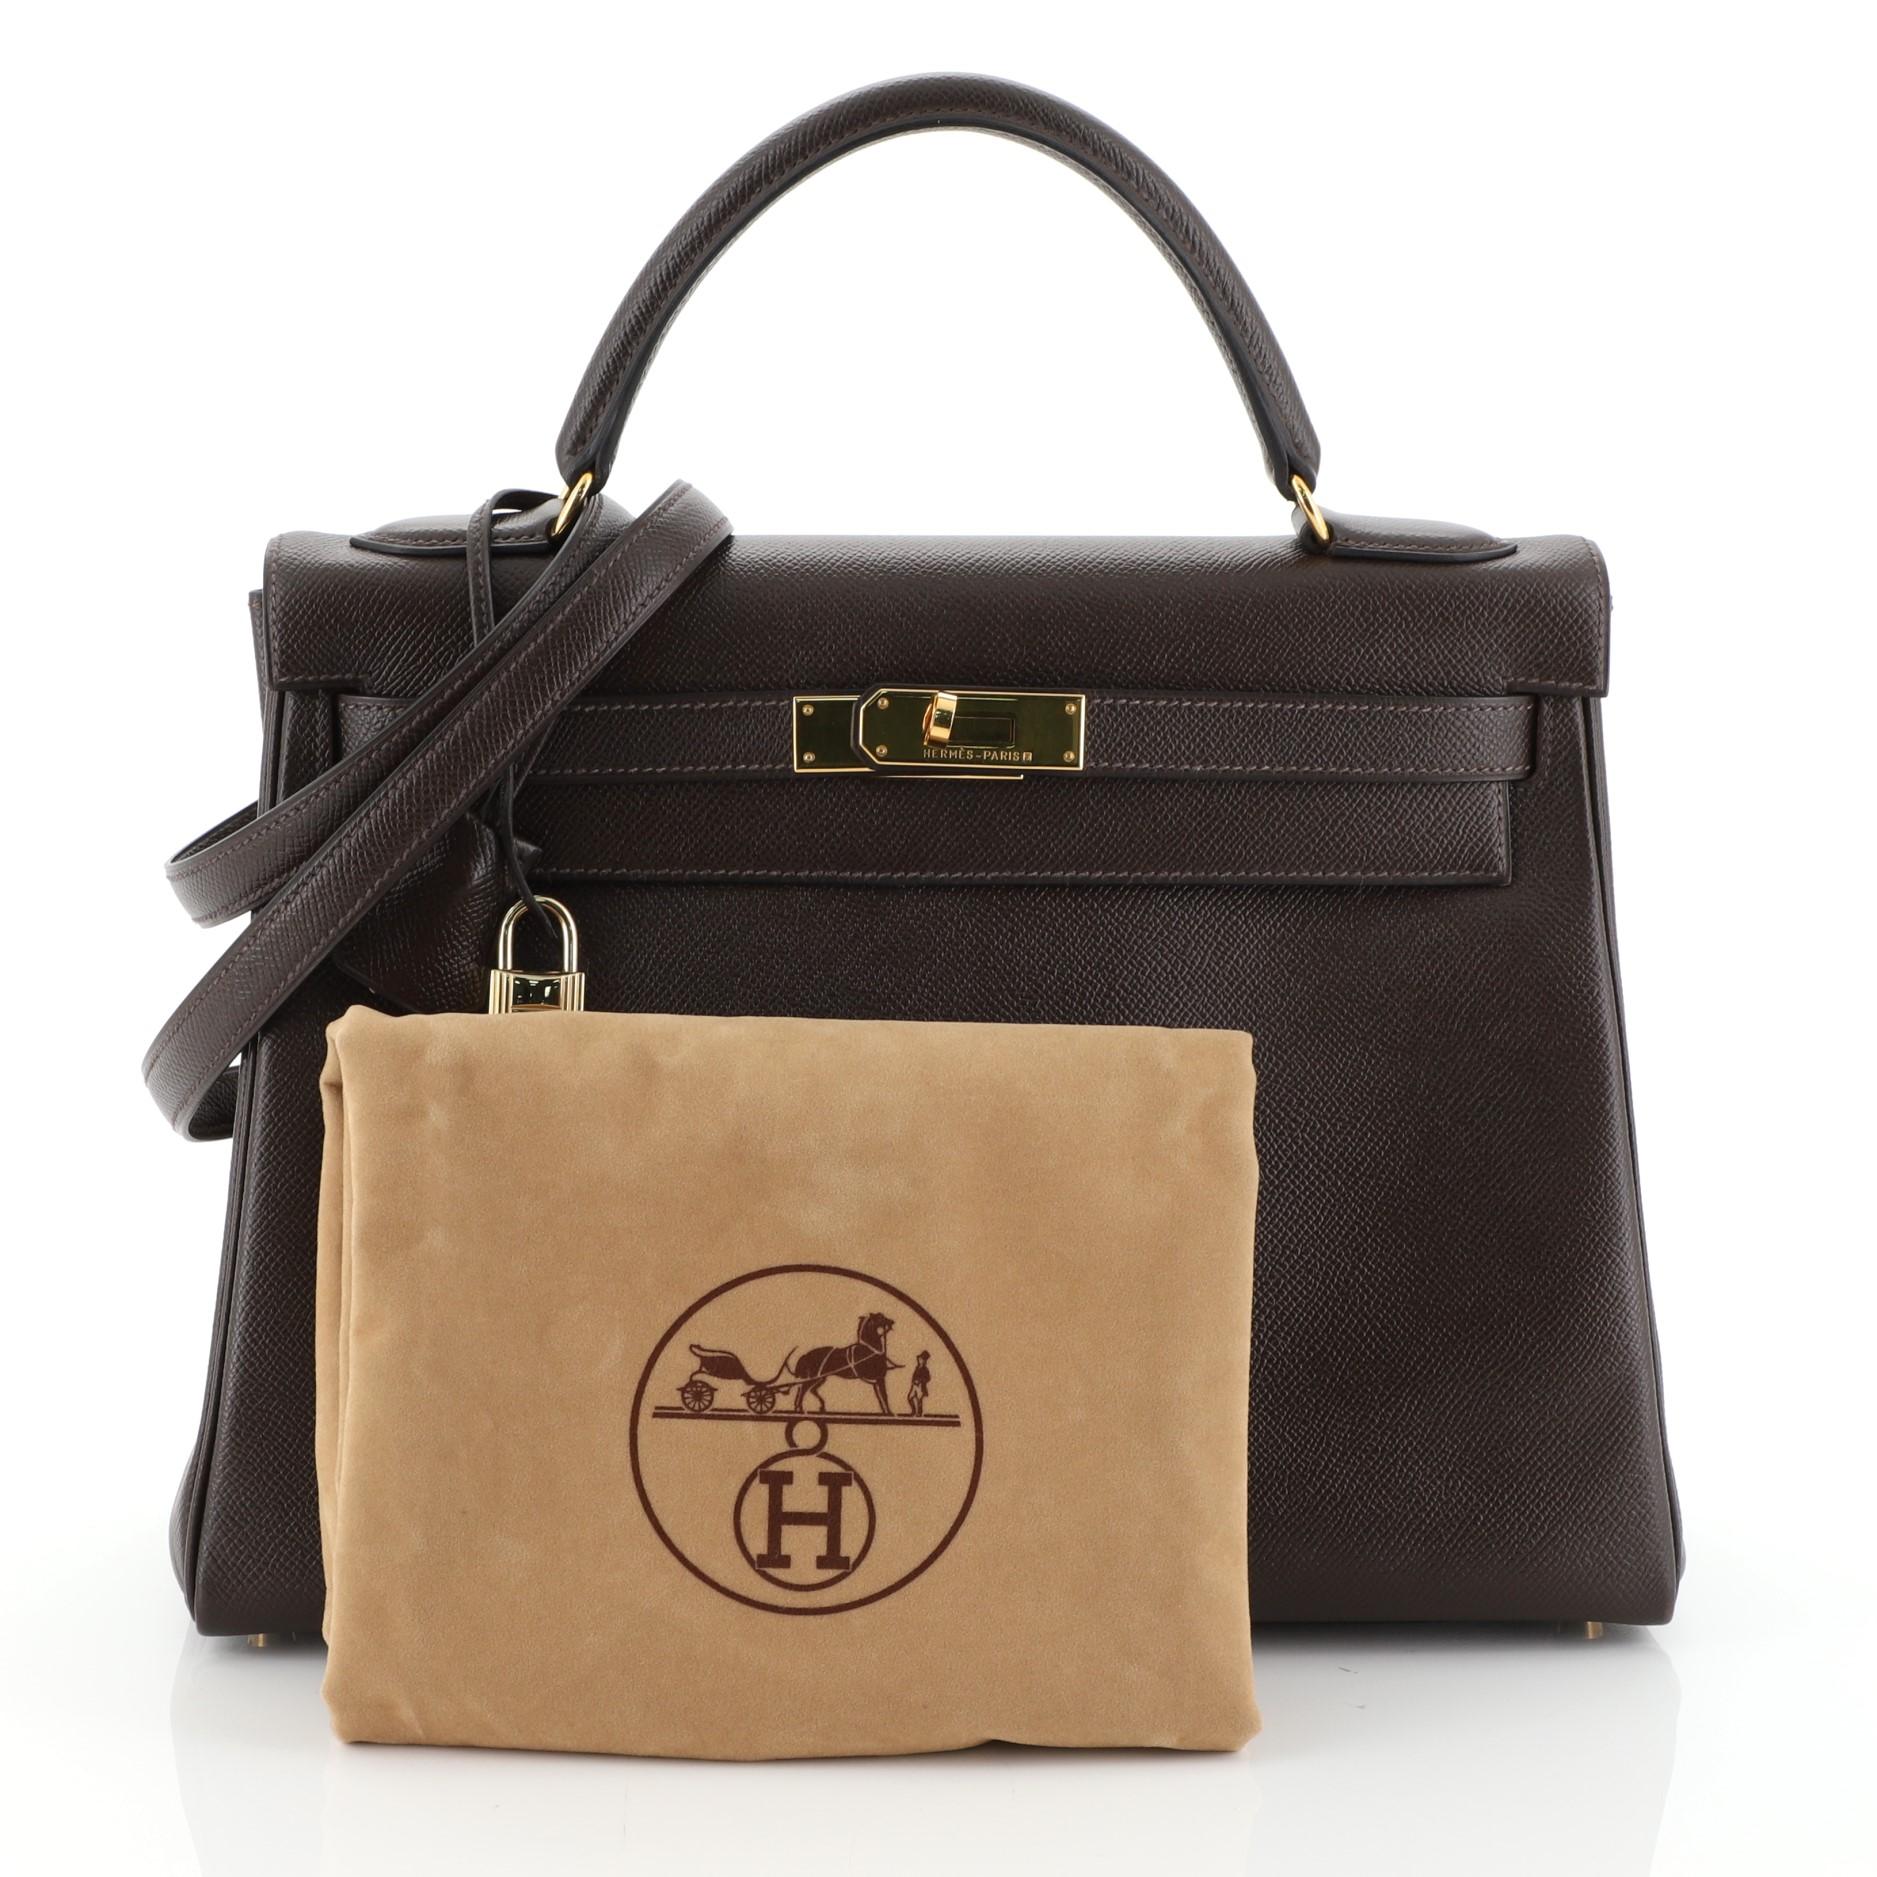 This Hermes Kelly Handbag Chocolate Courchevel with Gold Hardware 32, crafted from Chocolate brown Courchevel leather, features a single top handle and gold hardware. Its turn-lock closure opens to a Chocolate brown Chevre leather interior with zip